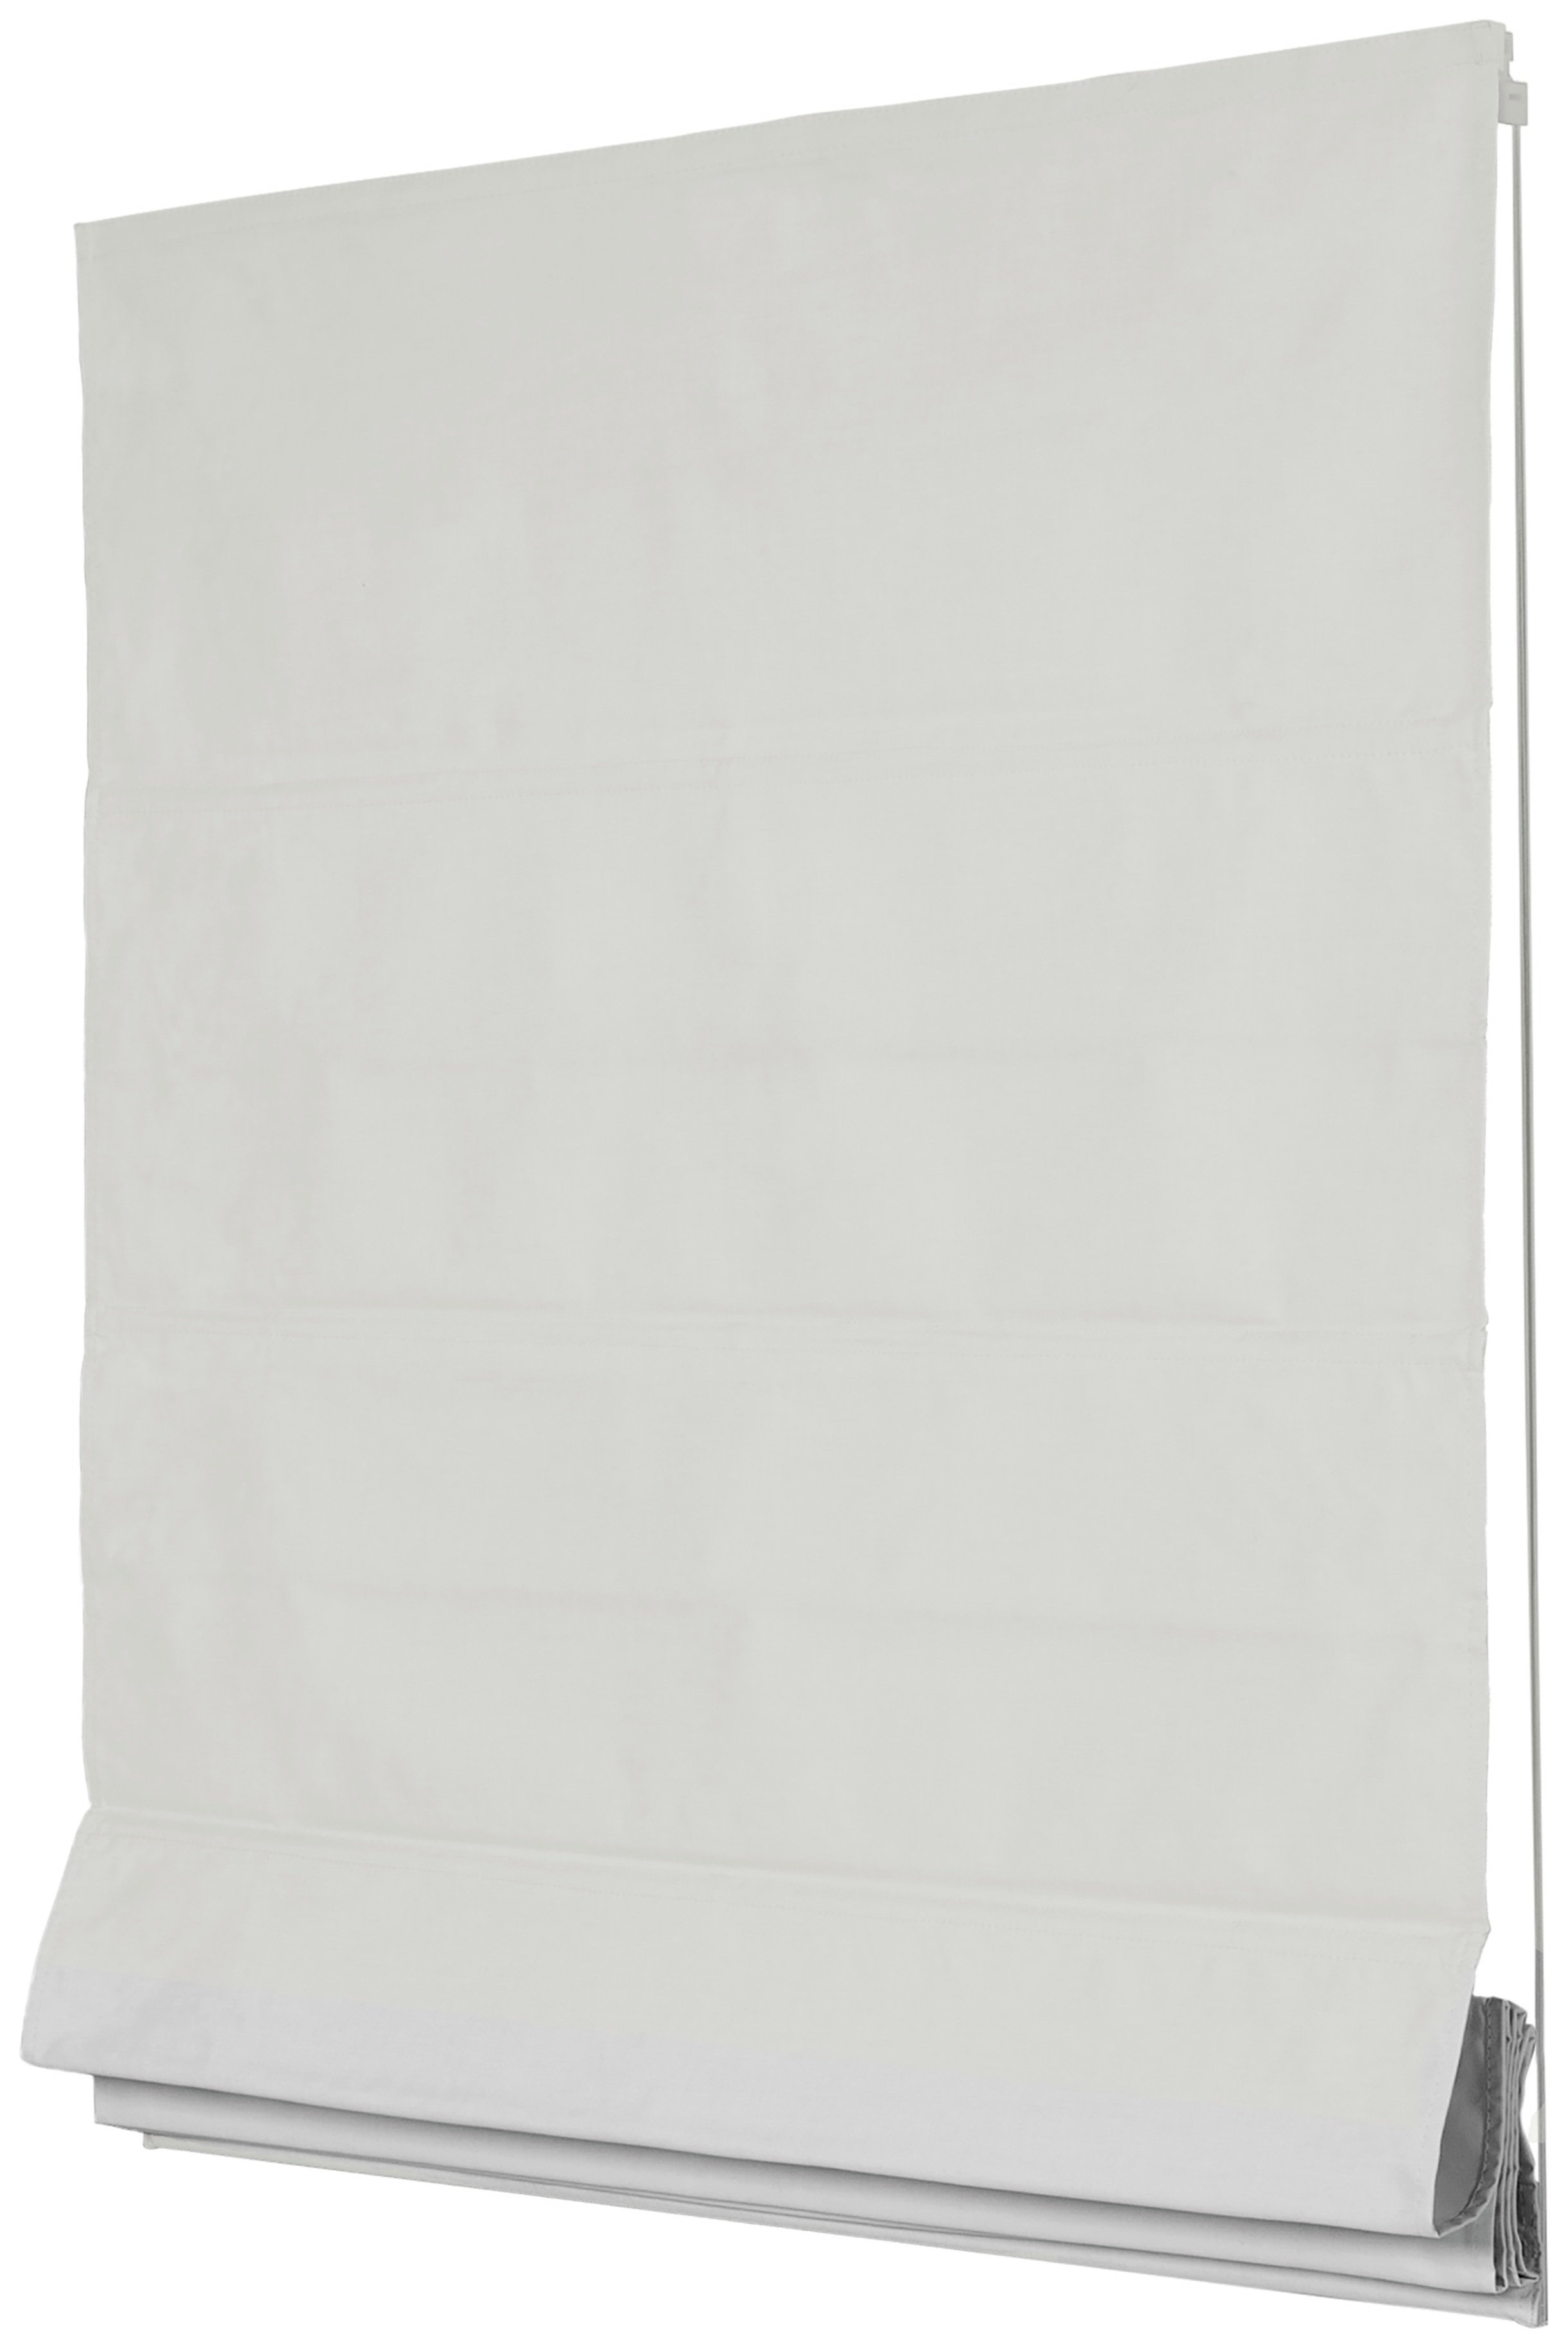 Intensions Roman Blind - 4ft - White